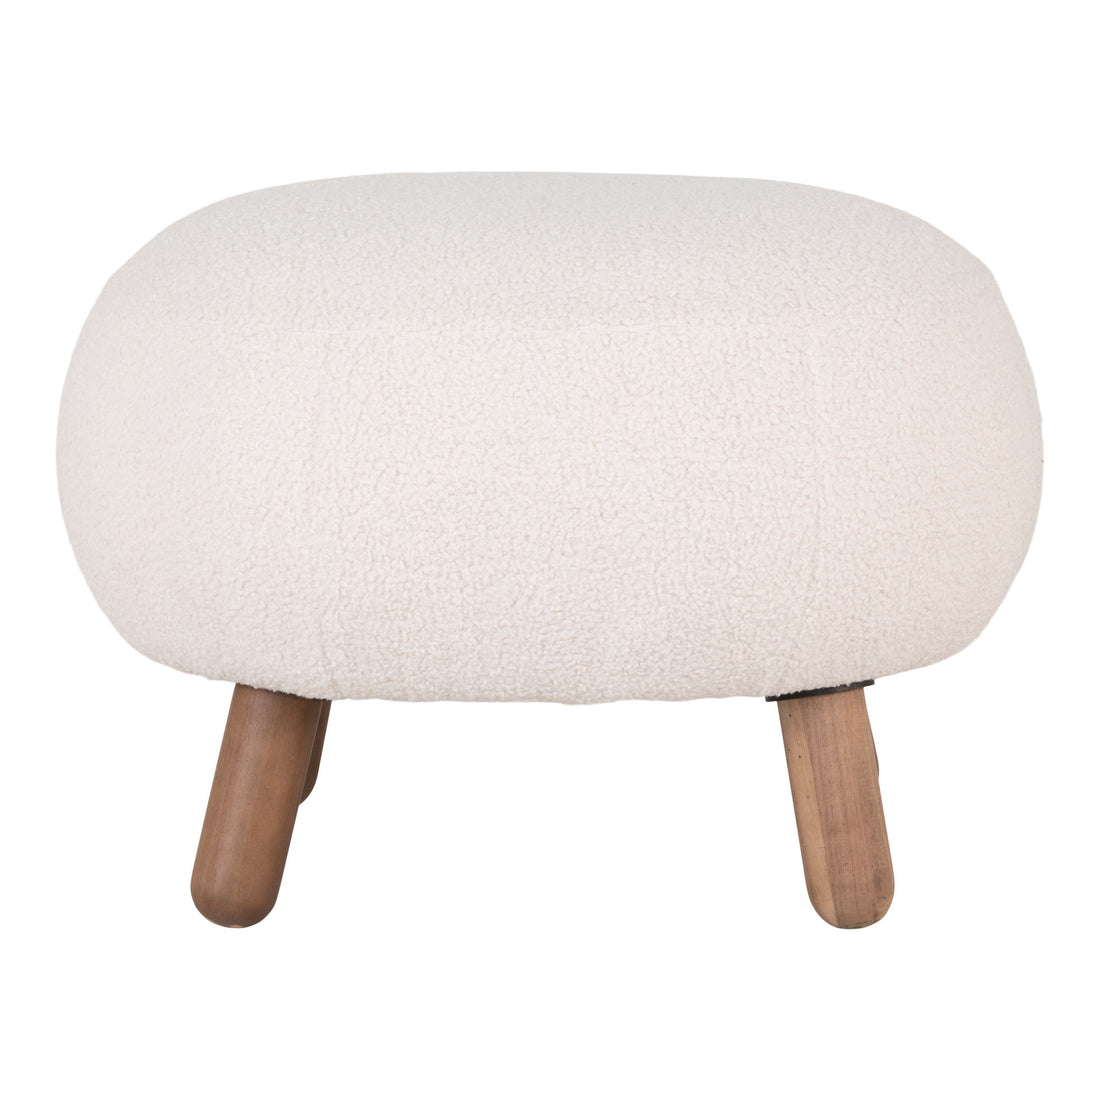 Savona Footstool - Footstool in Artificial Lambskin with Walnut -Colored Ben - 1 - PCS